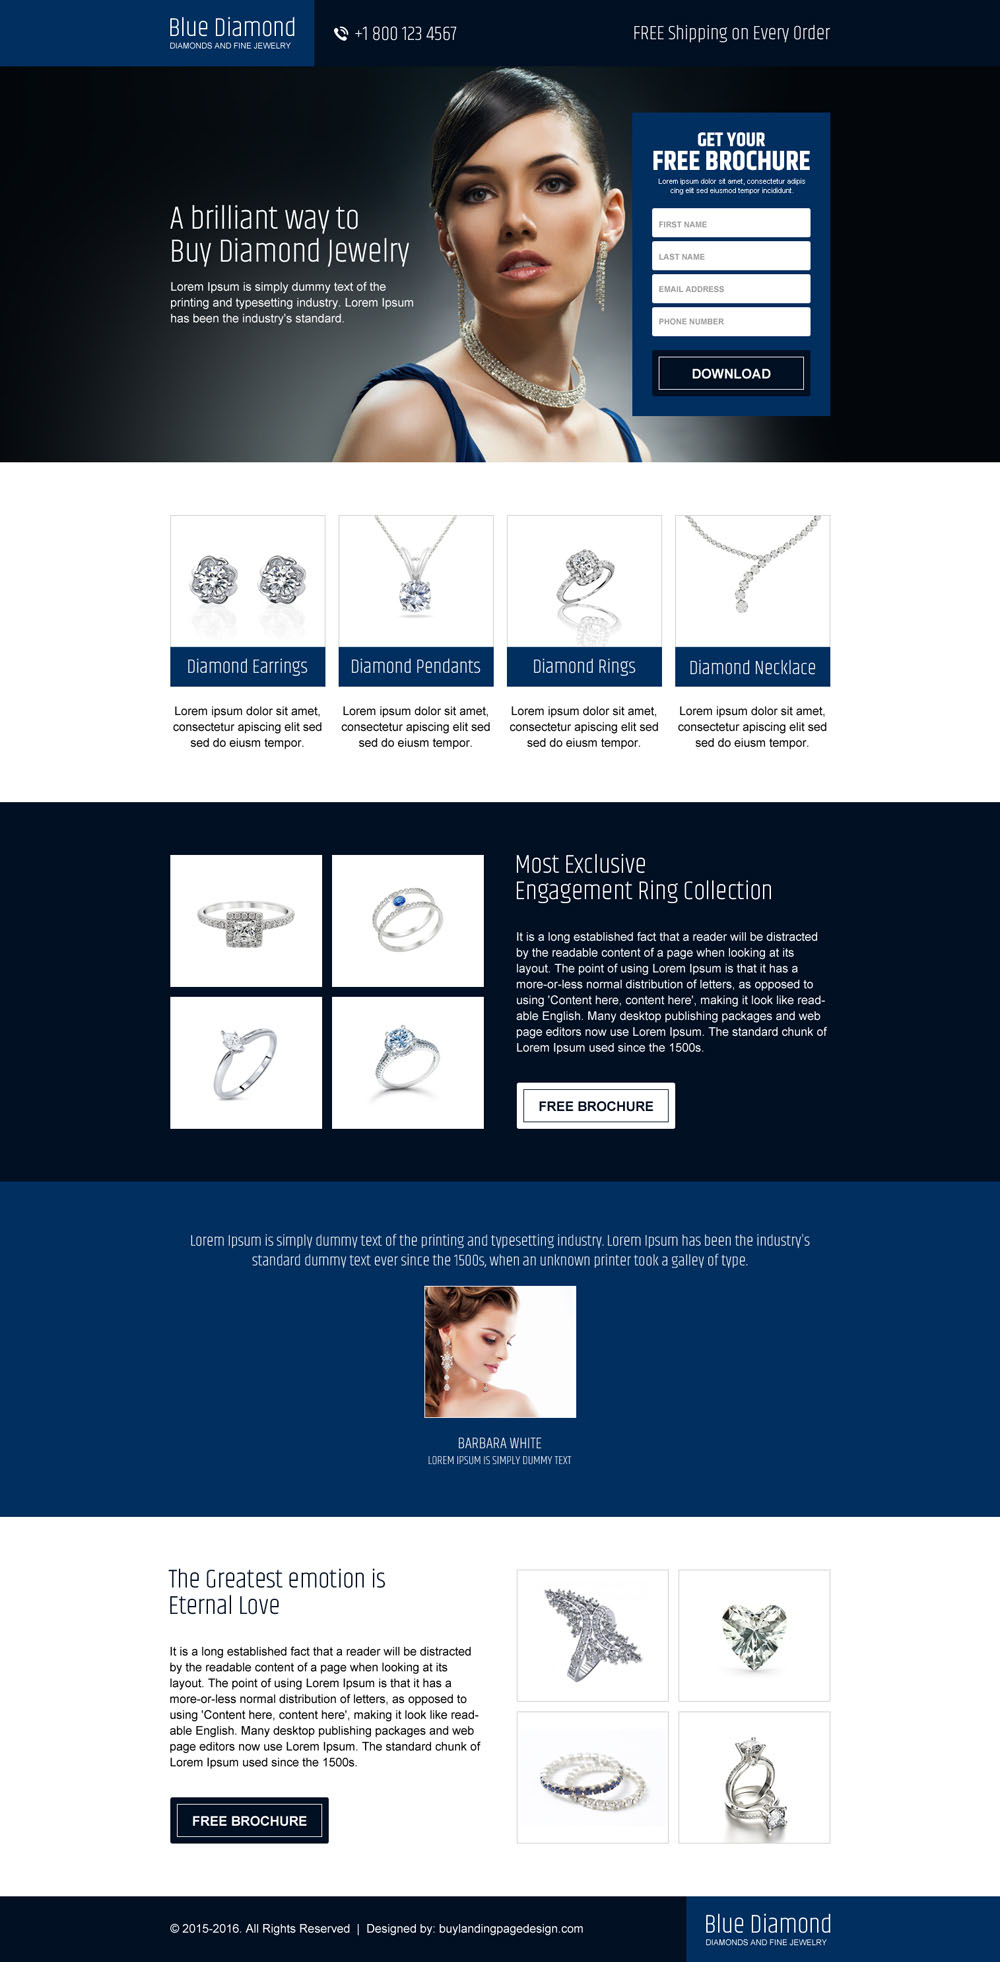 jewelry-landing-page-design-templates-to-capture-leads-and-increase-sales-001